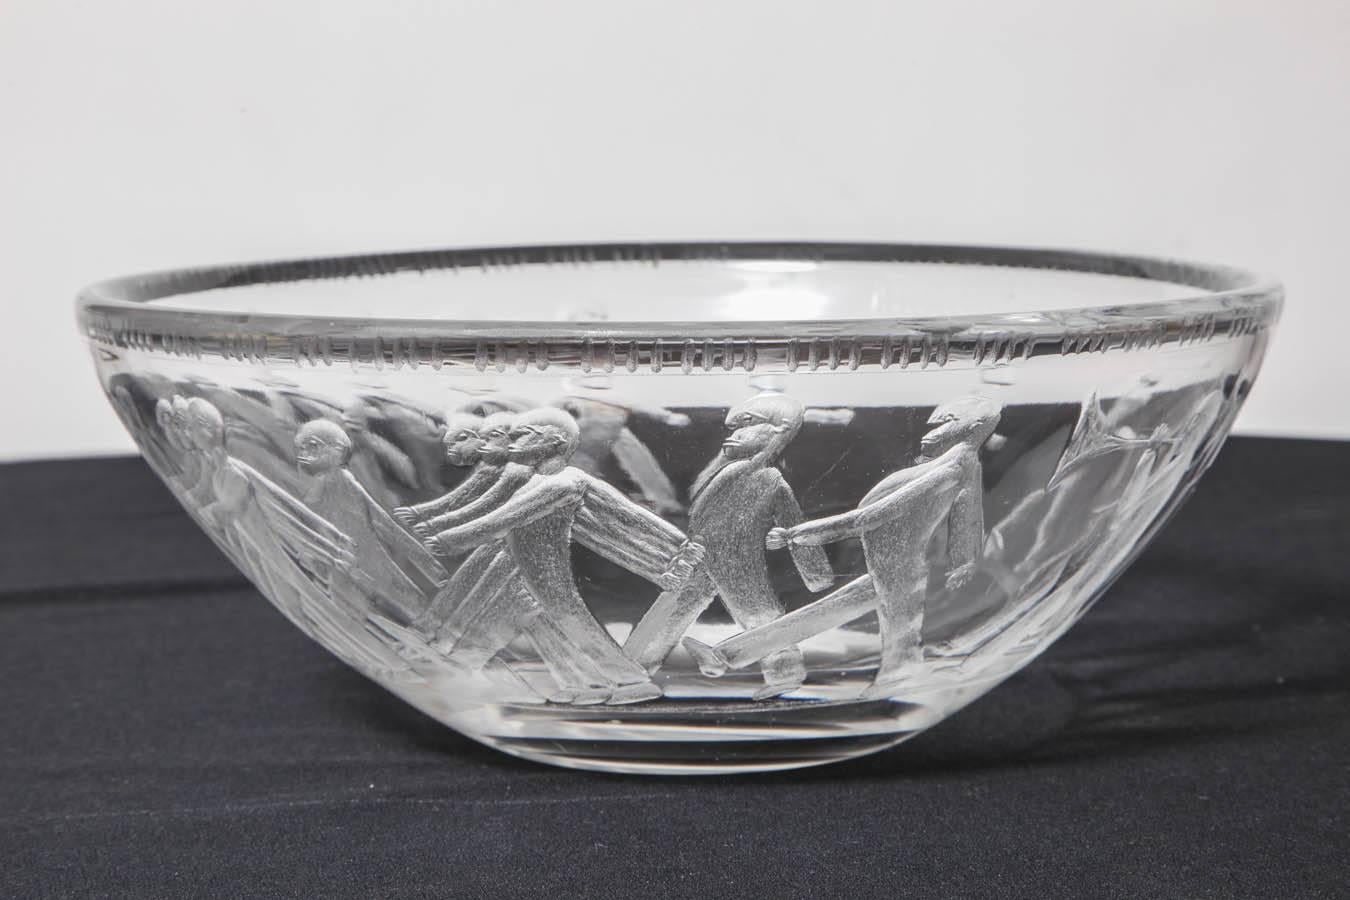 An Rare and Unusual Etched Glass Centerpiece Bowl by Erik Höglund for
 Kosta Boda, circa 1955. The Centerpiece is decorated all around with  
engraved marching men at some points etched three across.
Engraved on underside: 838/1185, Höglund